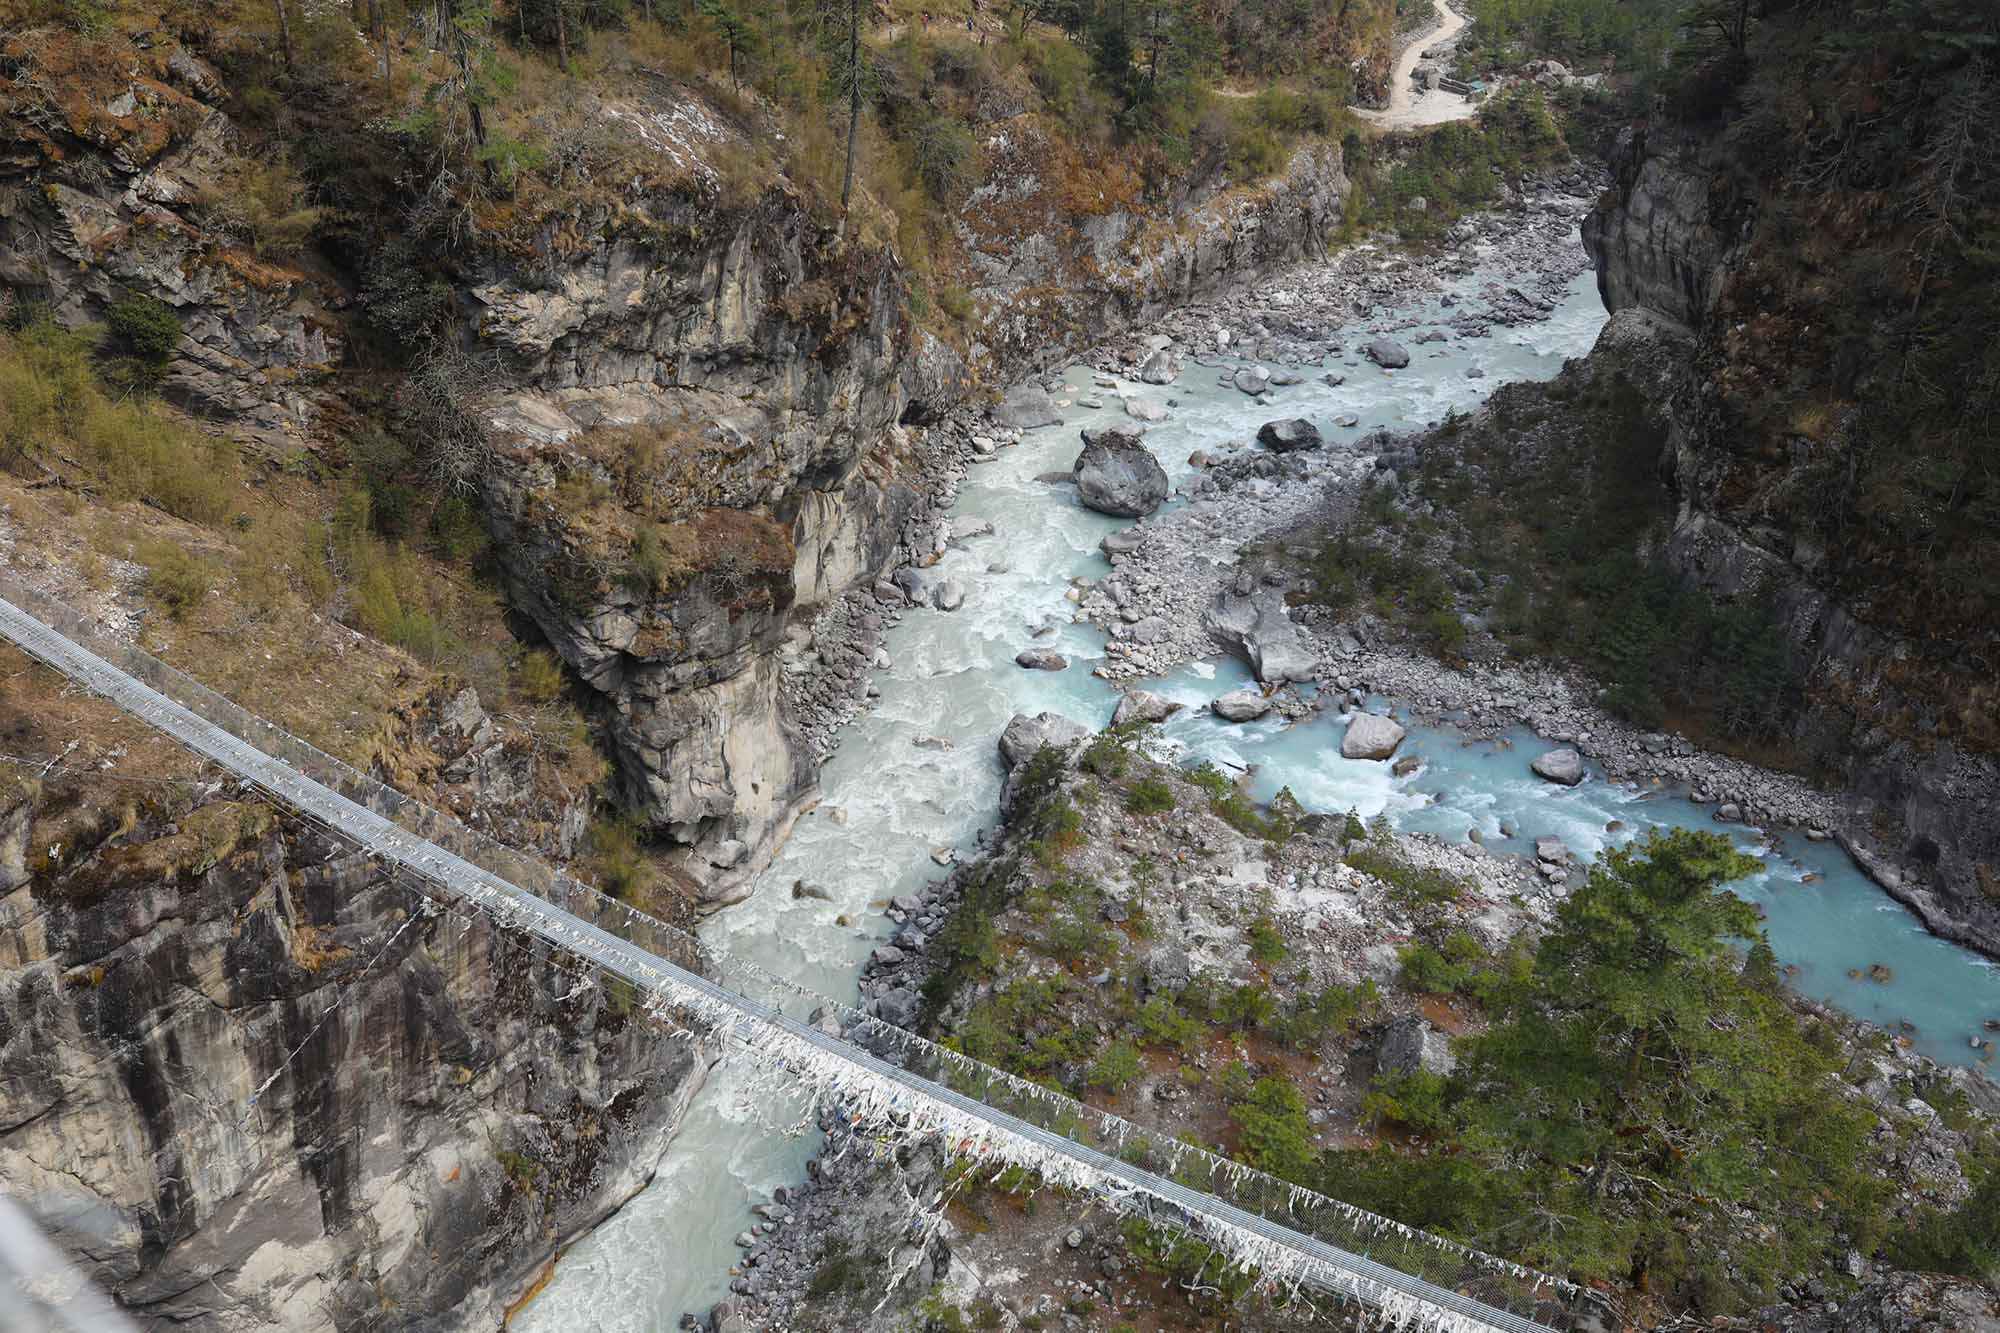 In photos: The widespread threats of melting Himalayan glaciers